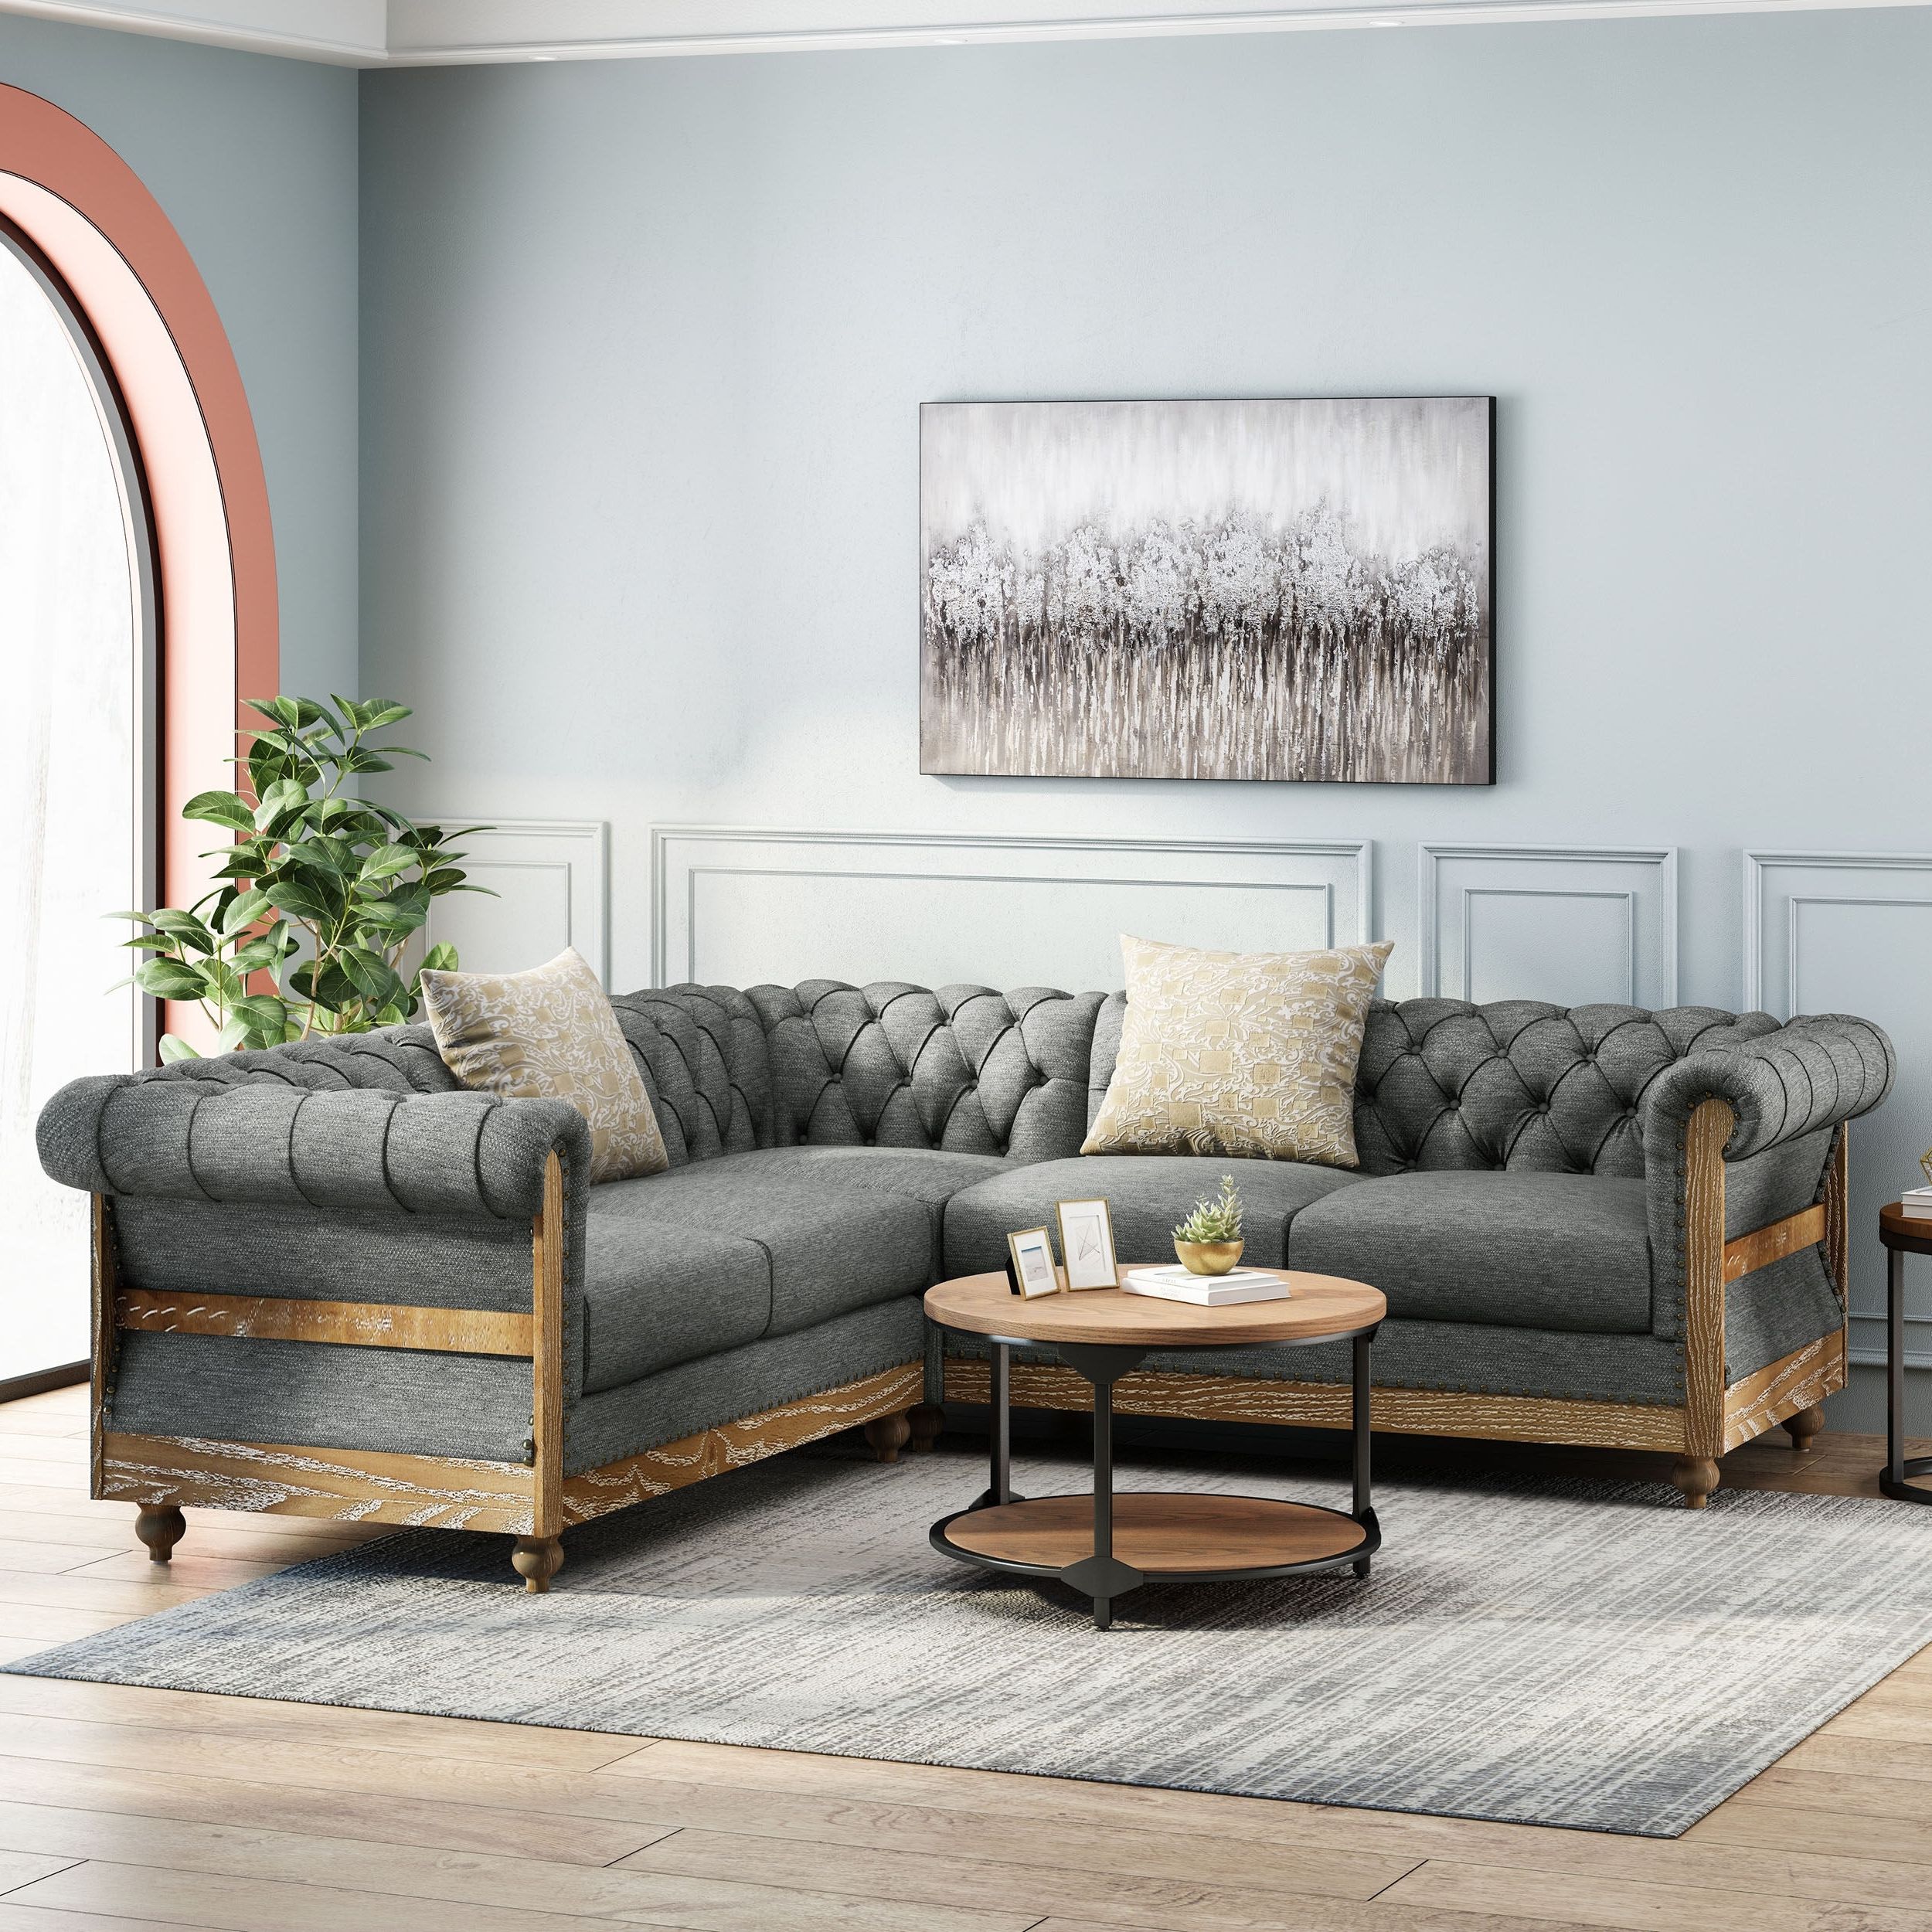 Voll Tufted Sectional Sofa With Nailhead Trimchristopher Knight Home –  On Sale – – 34155767 With Sofas With Nailhead Trim (View 11 of 20)